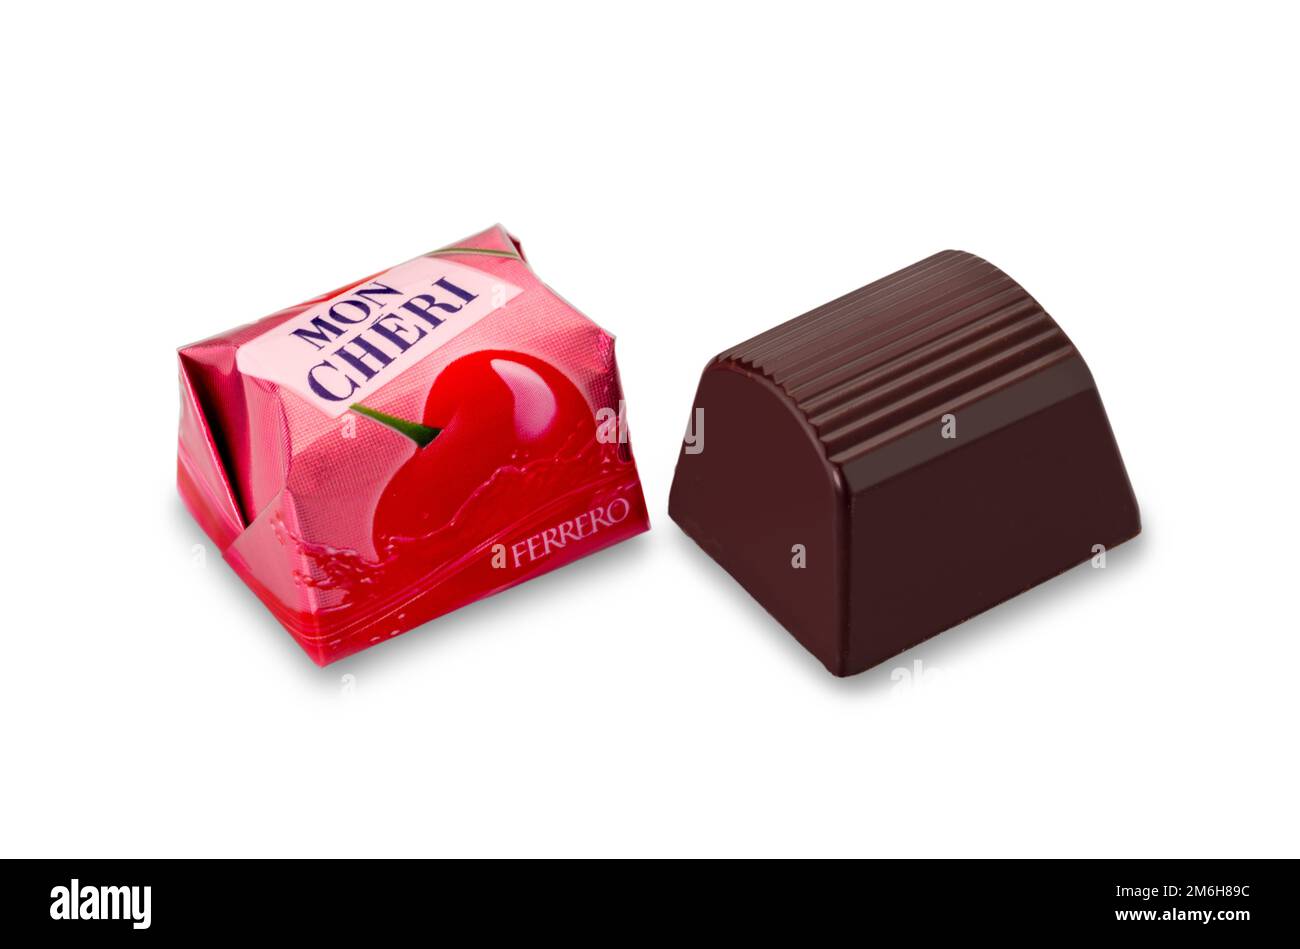 https://c8.alamy.com/comp/2M6H89C/alba-italy-january-04-2023-mon-cheri-ferrero-dark-chocolate-filled-with-liqueur-and-cherry-close-up-of-package-and-unwrapped-chocolate-near-iso-2M6H89C.jpg